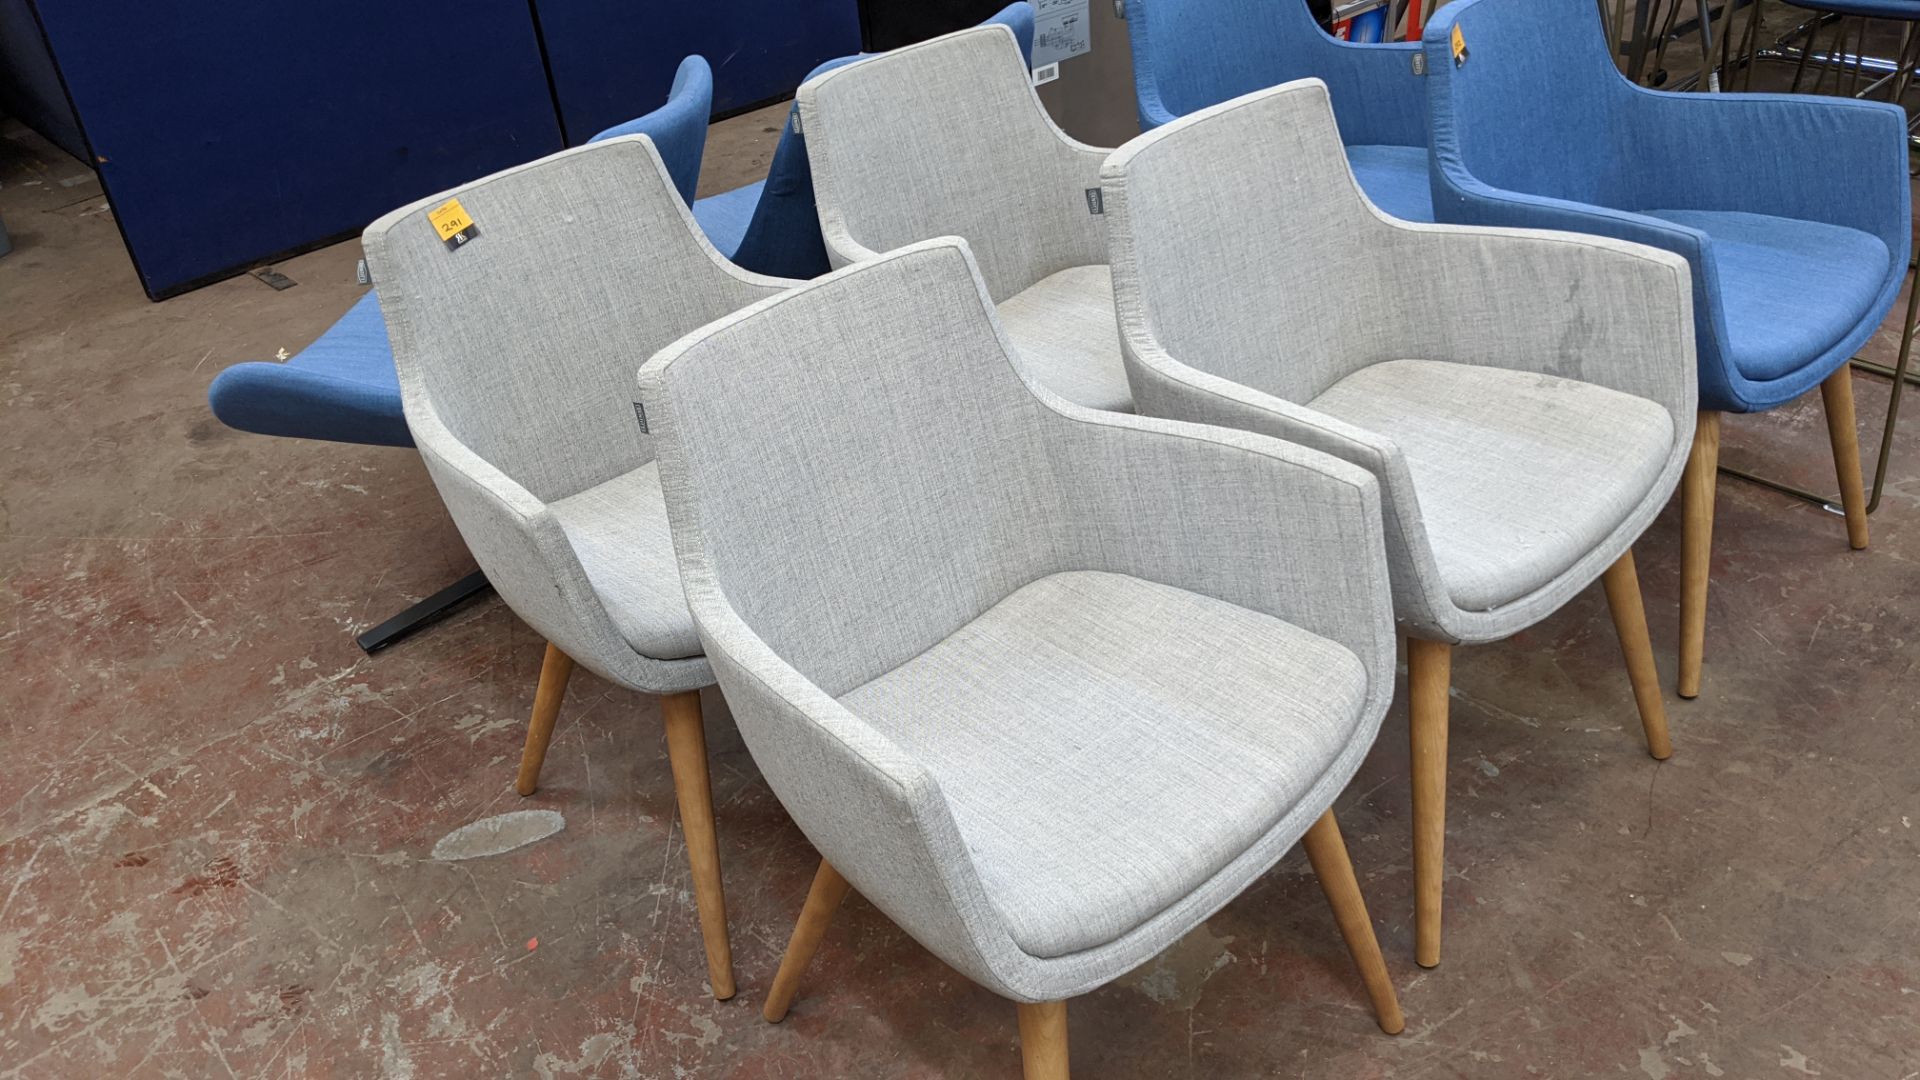 4 off Identity pale grey upholstered armchairs on wooden legs NB. The chair designs for lot 291 & 2